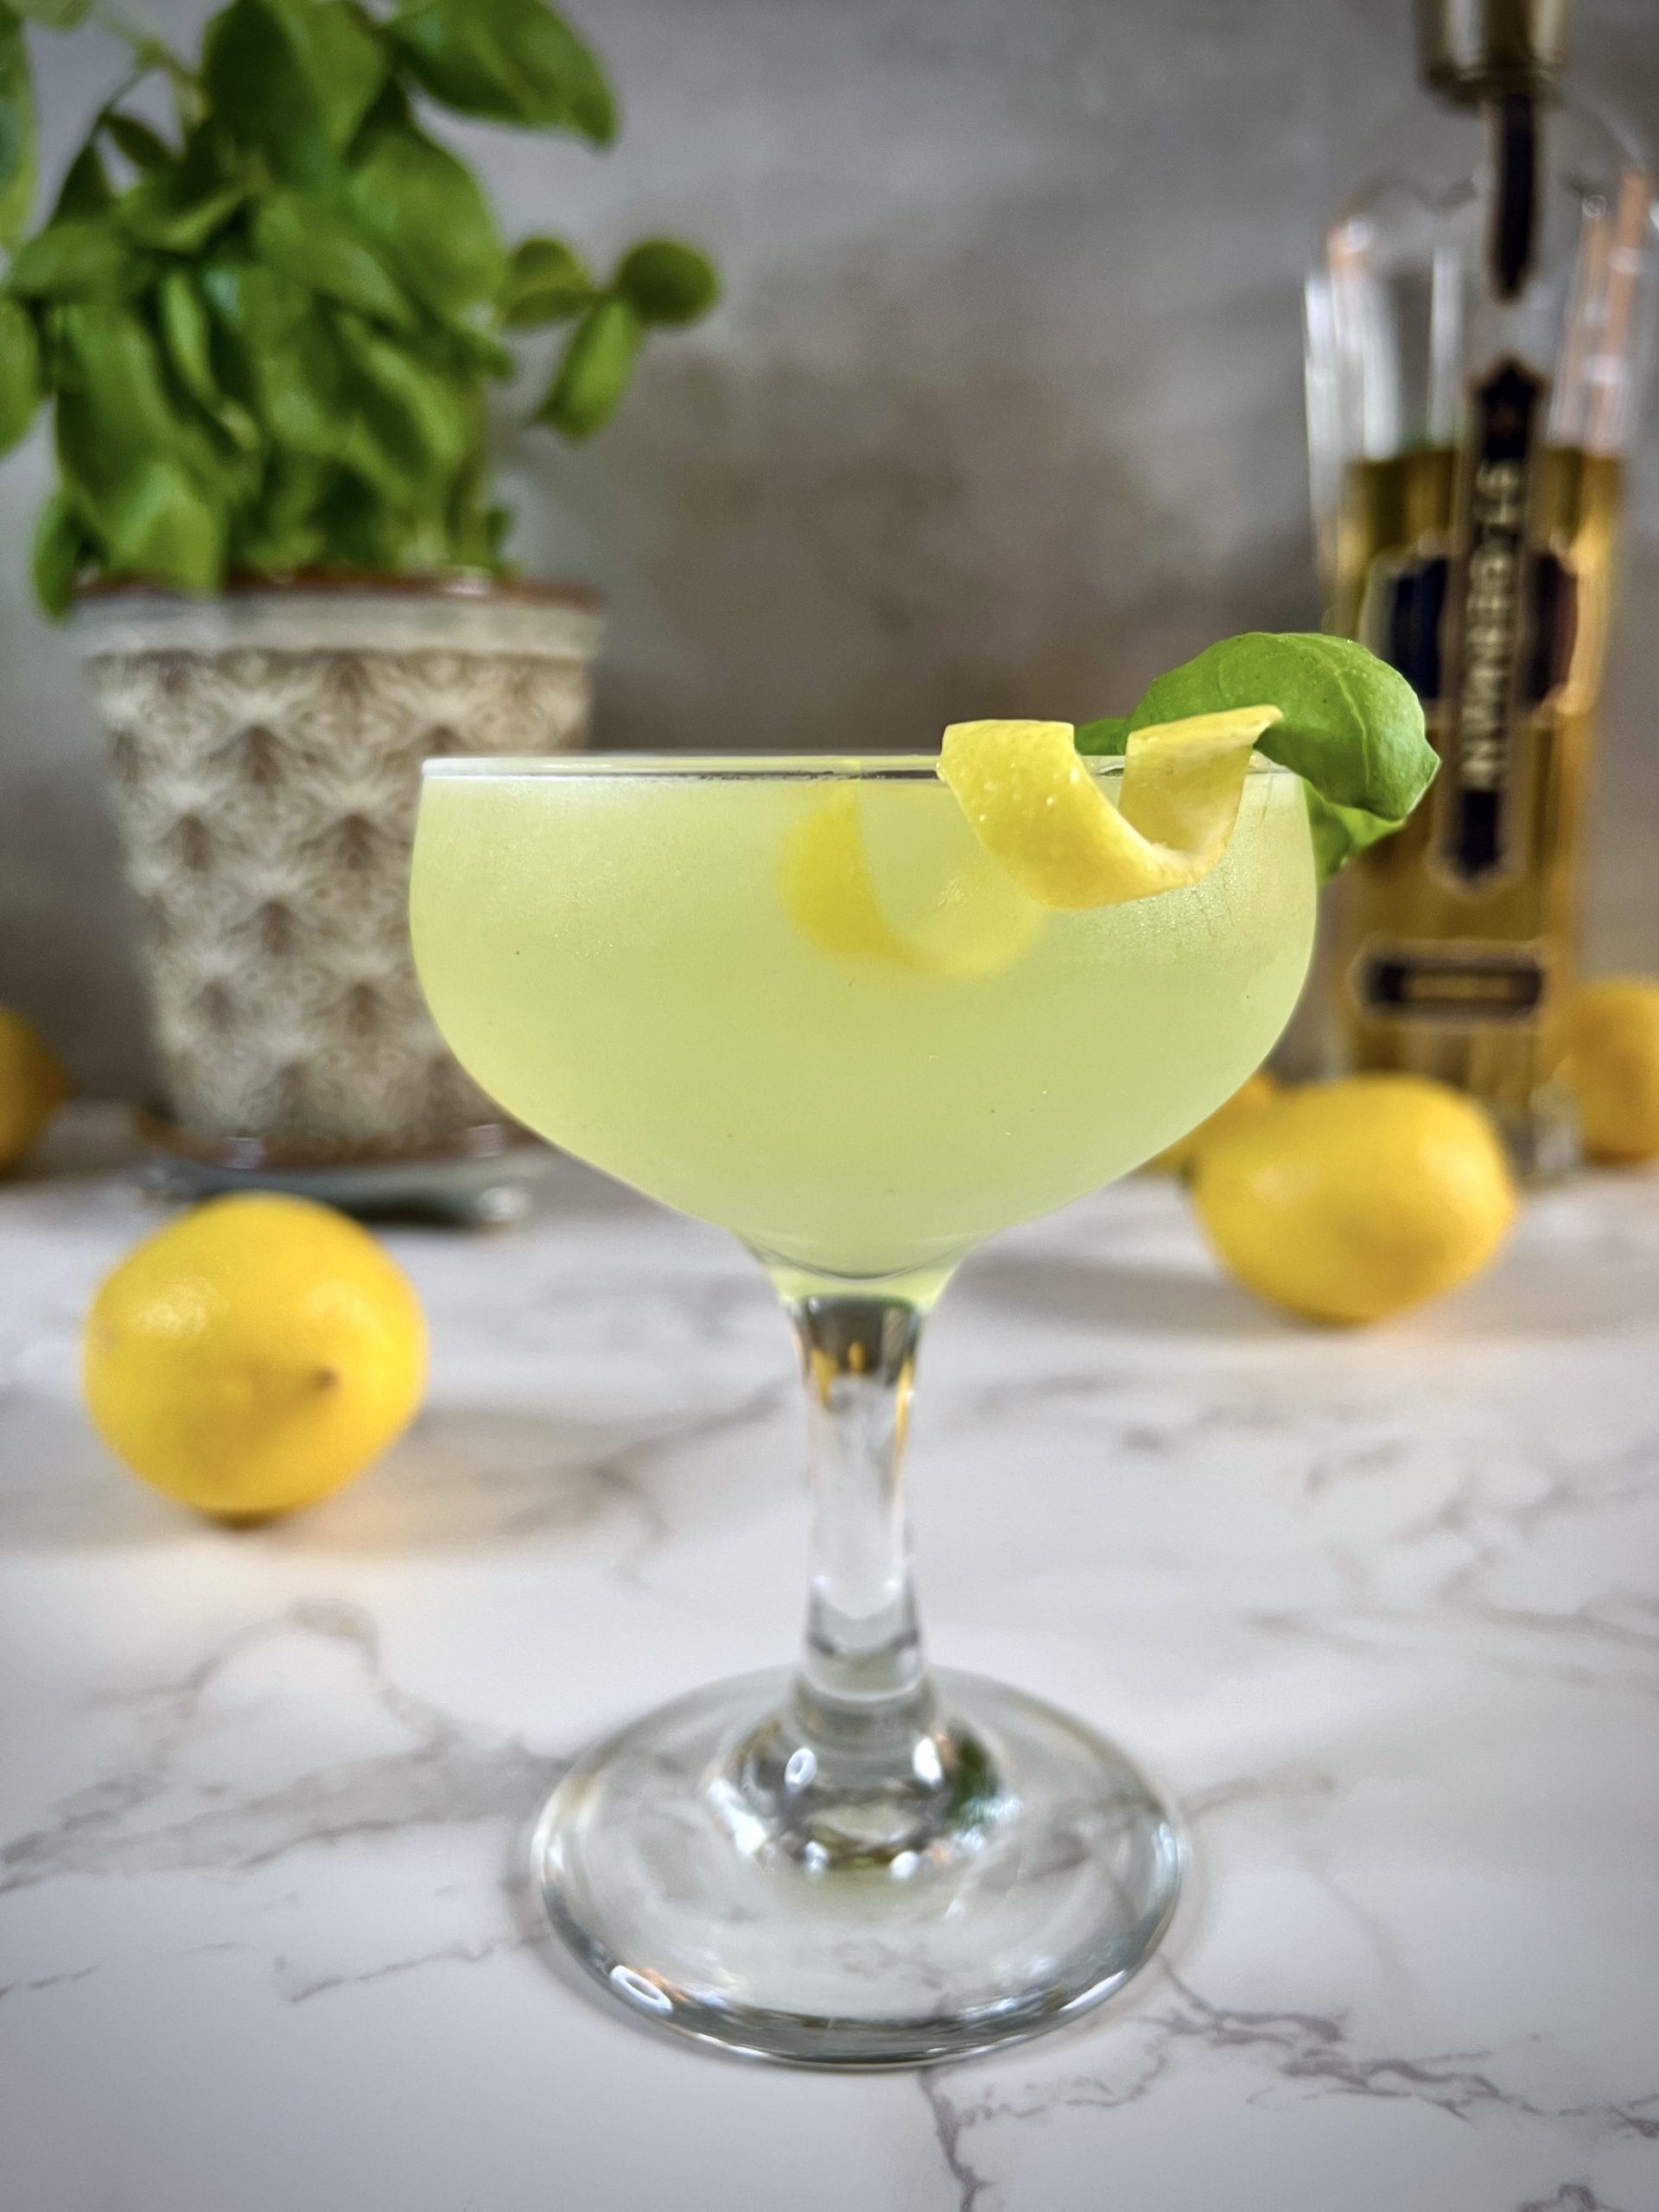 A close up of a St Germain Lemon Basil Martini with the lemon twist front and center.